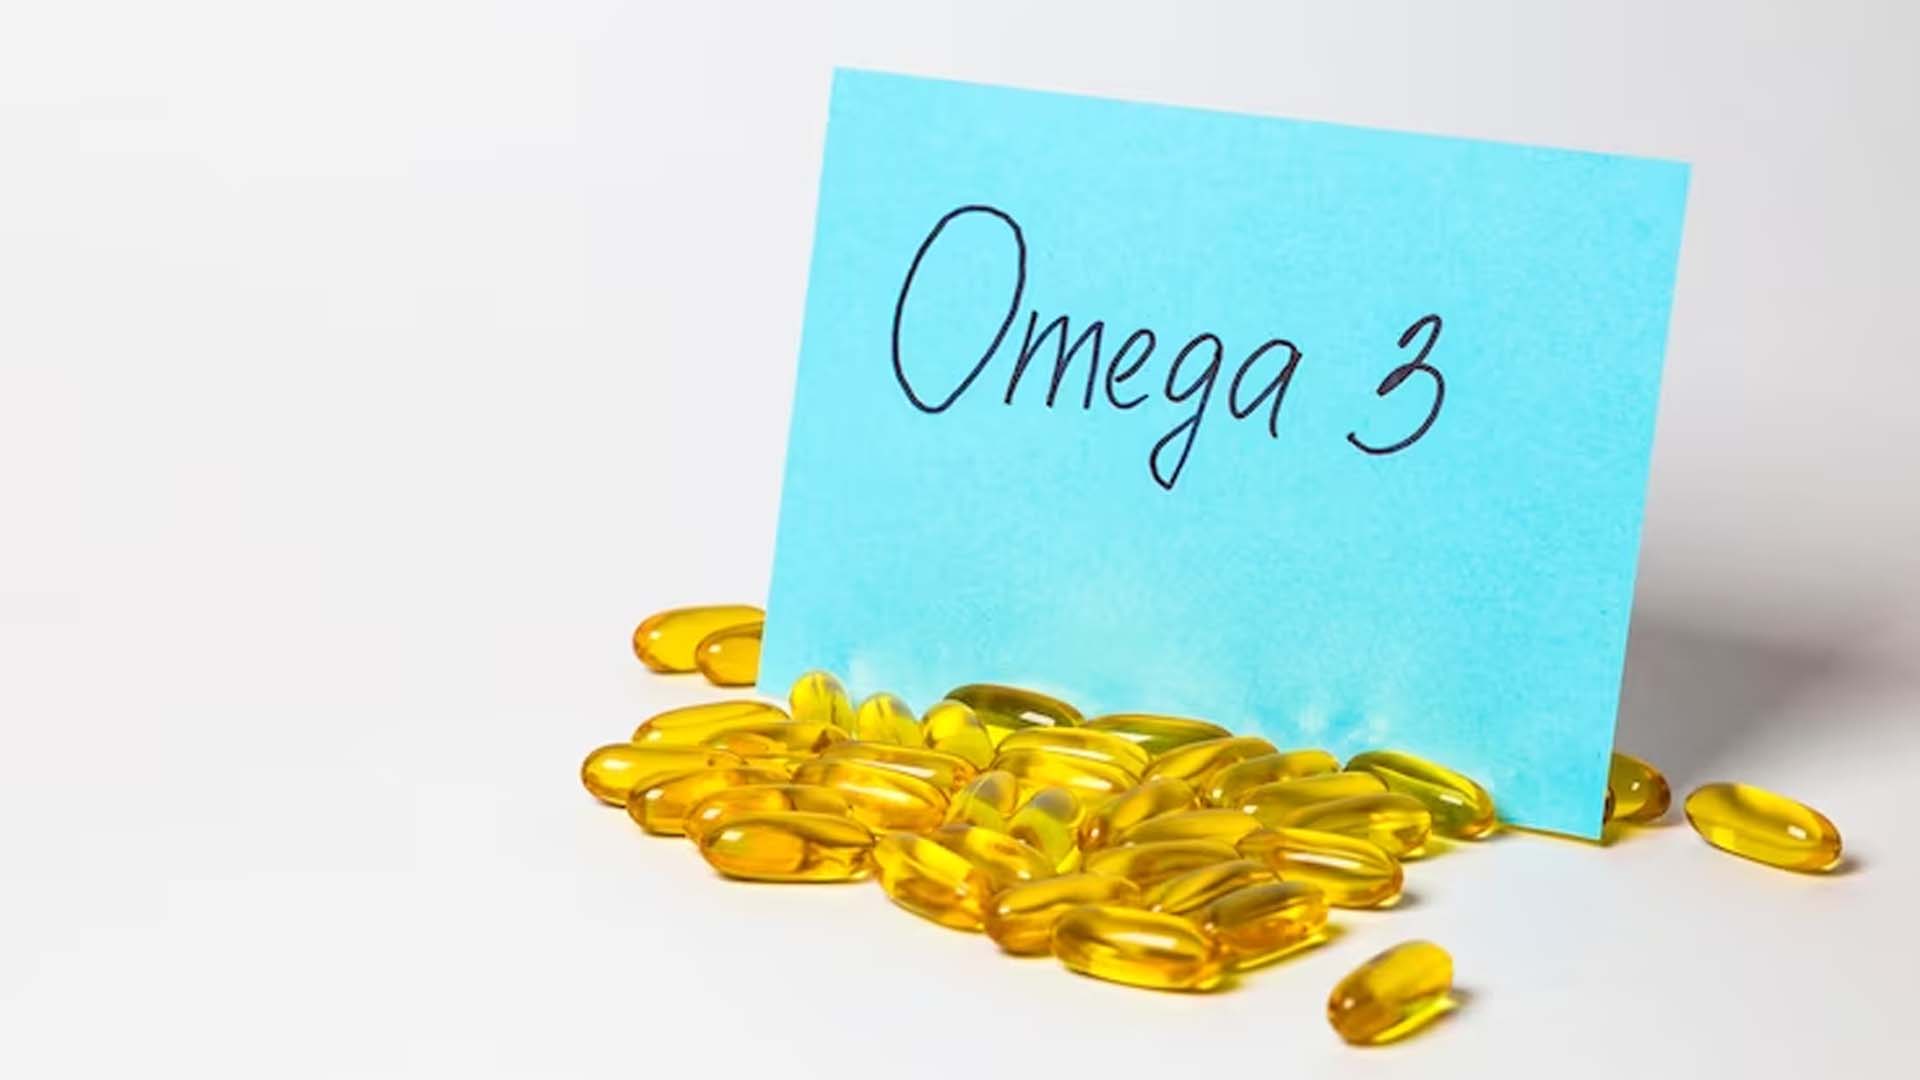 Omega-3 written and omega 3 supplements